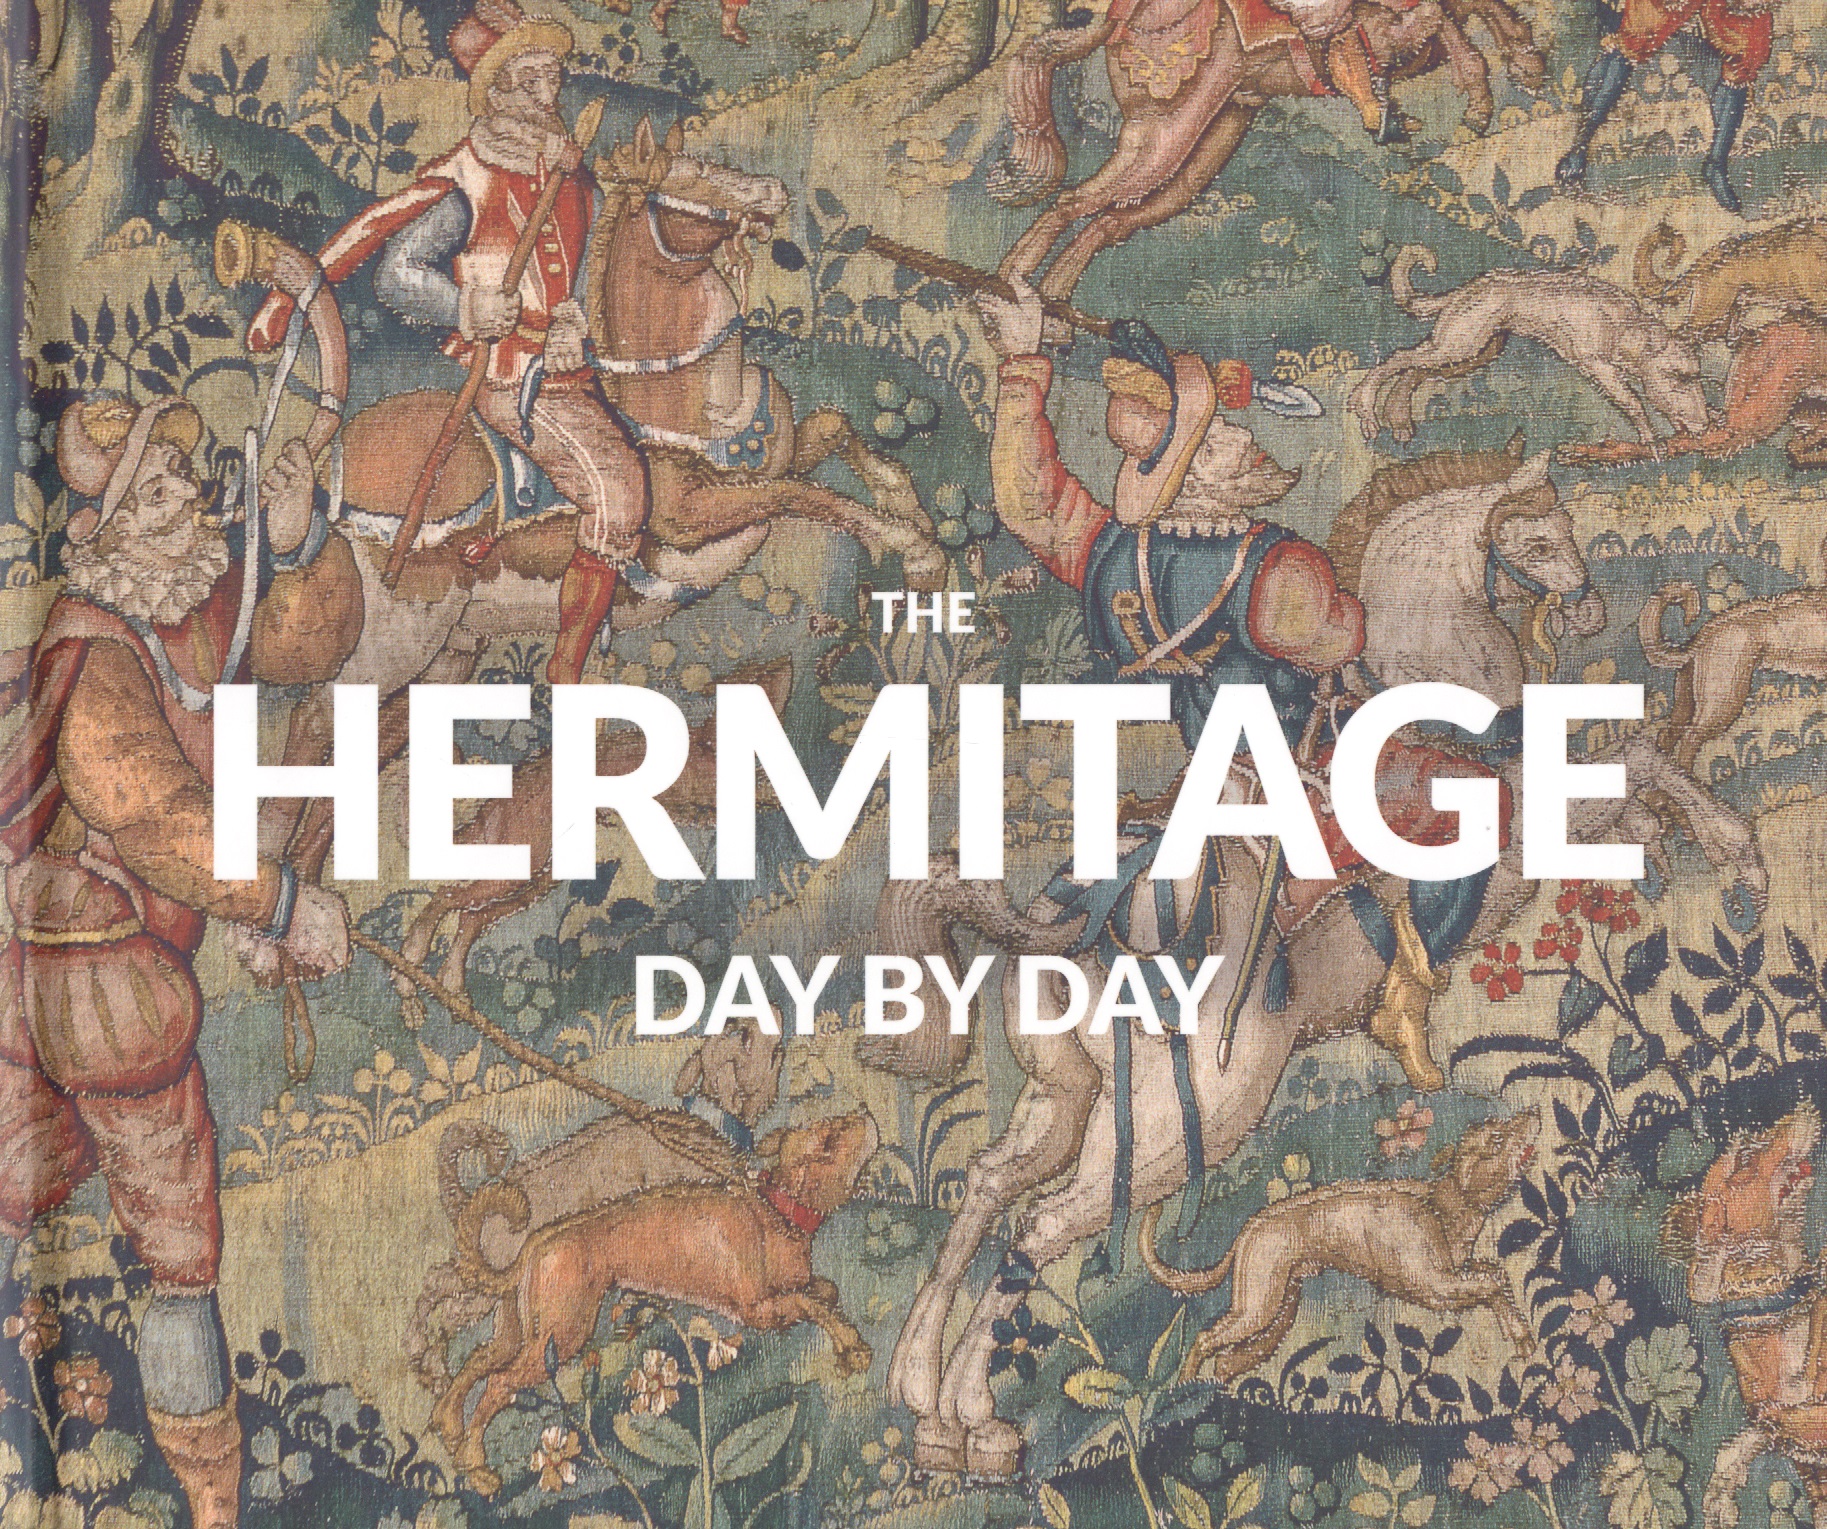 The Hermitage. Day by Day personal space